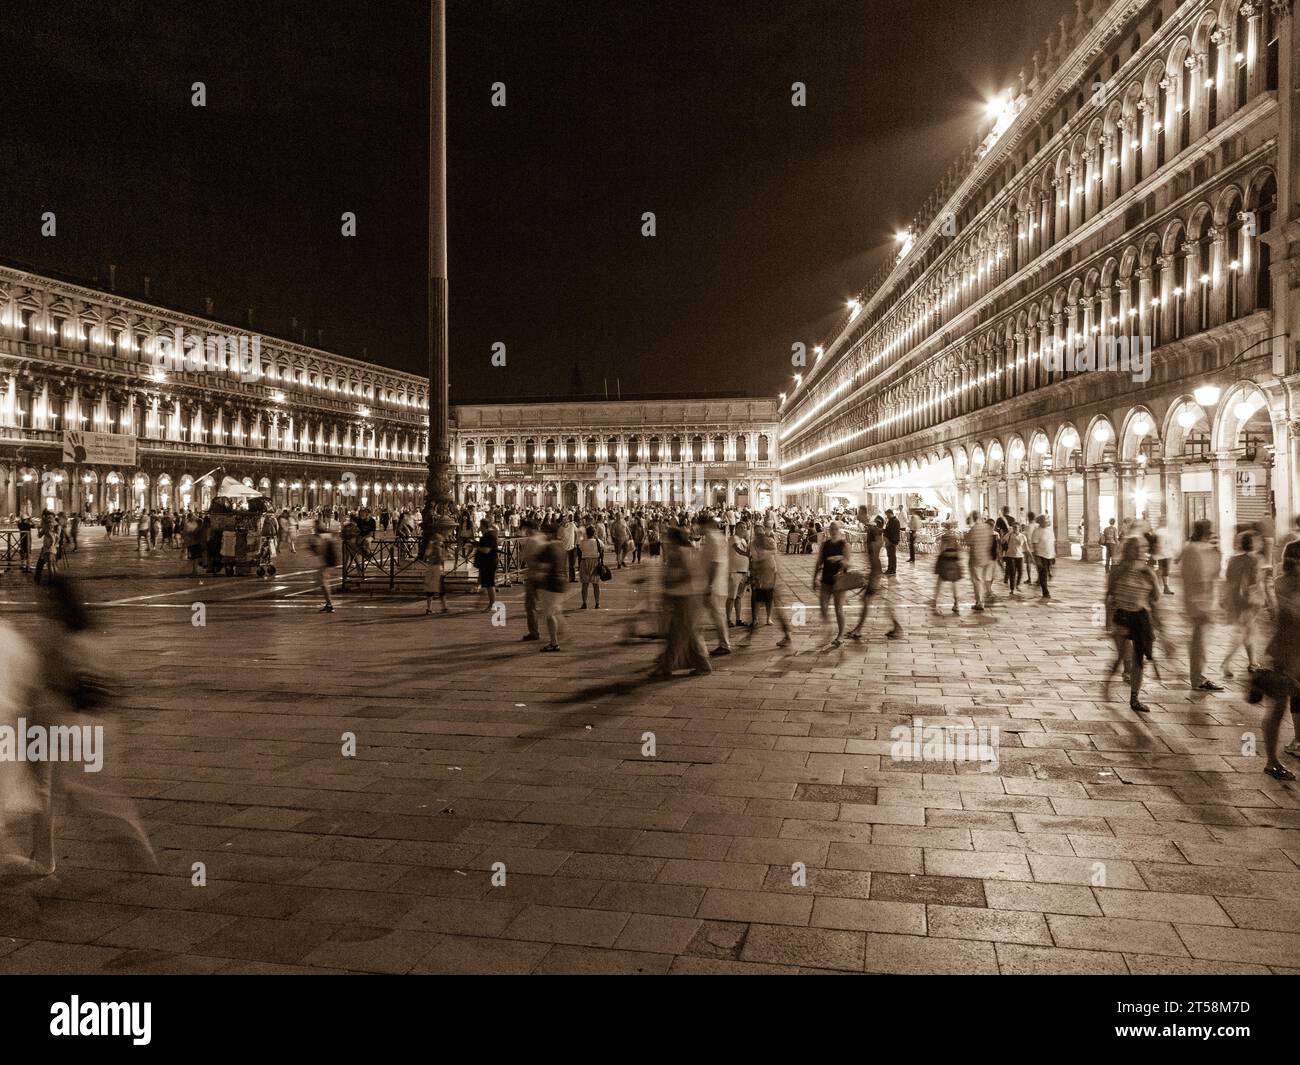 St. Mark's Square in Venice, Italy, at night. Black and white. The square is full of tourists. Stock Photo